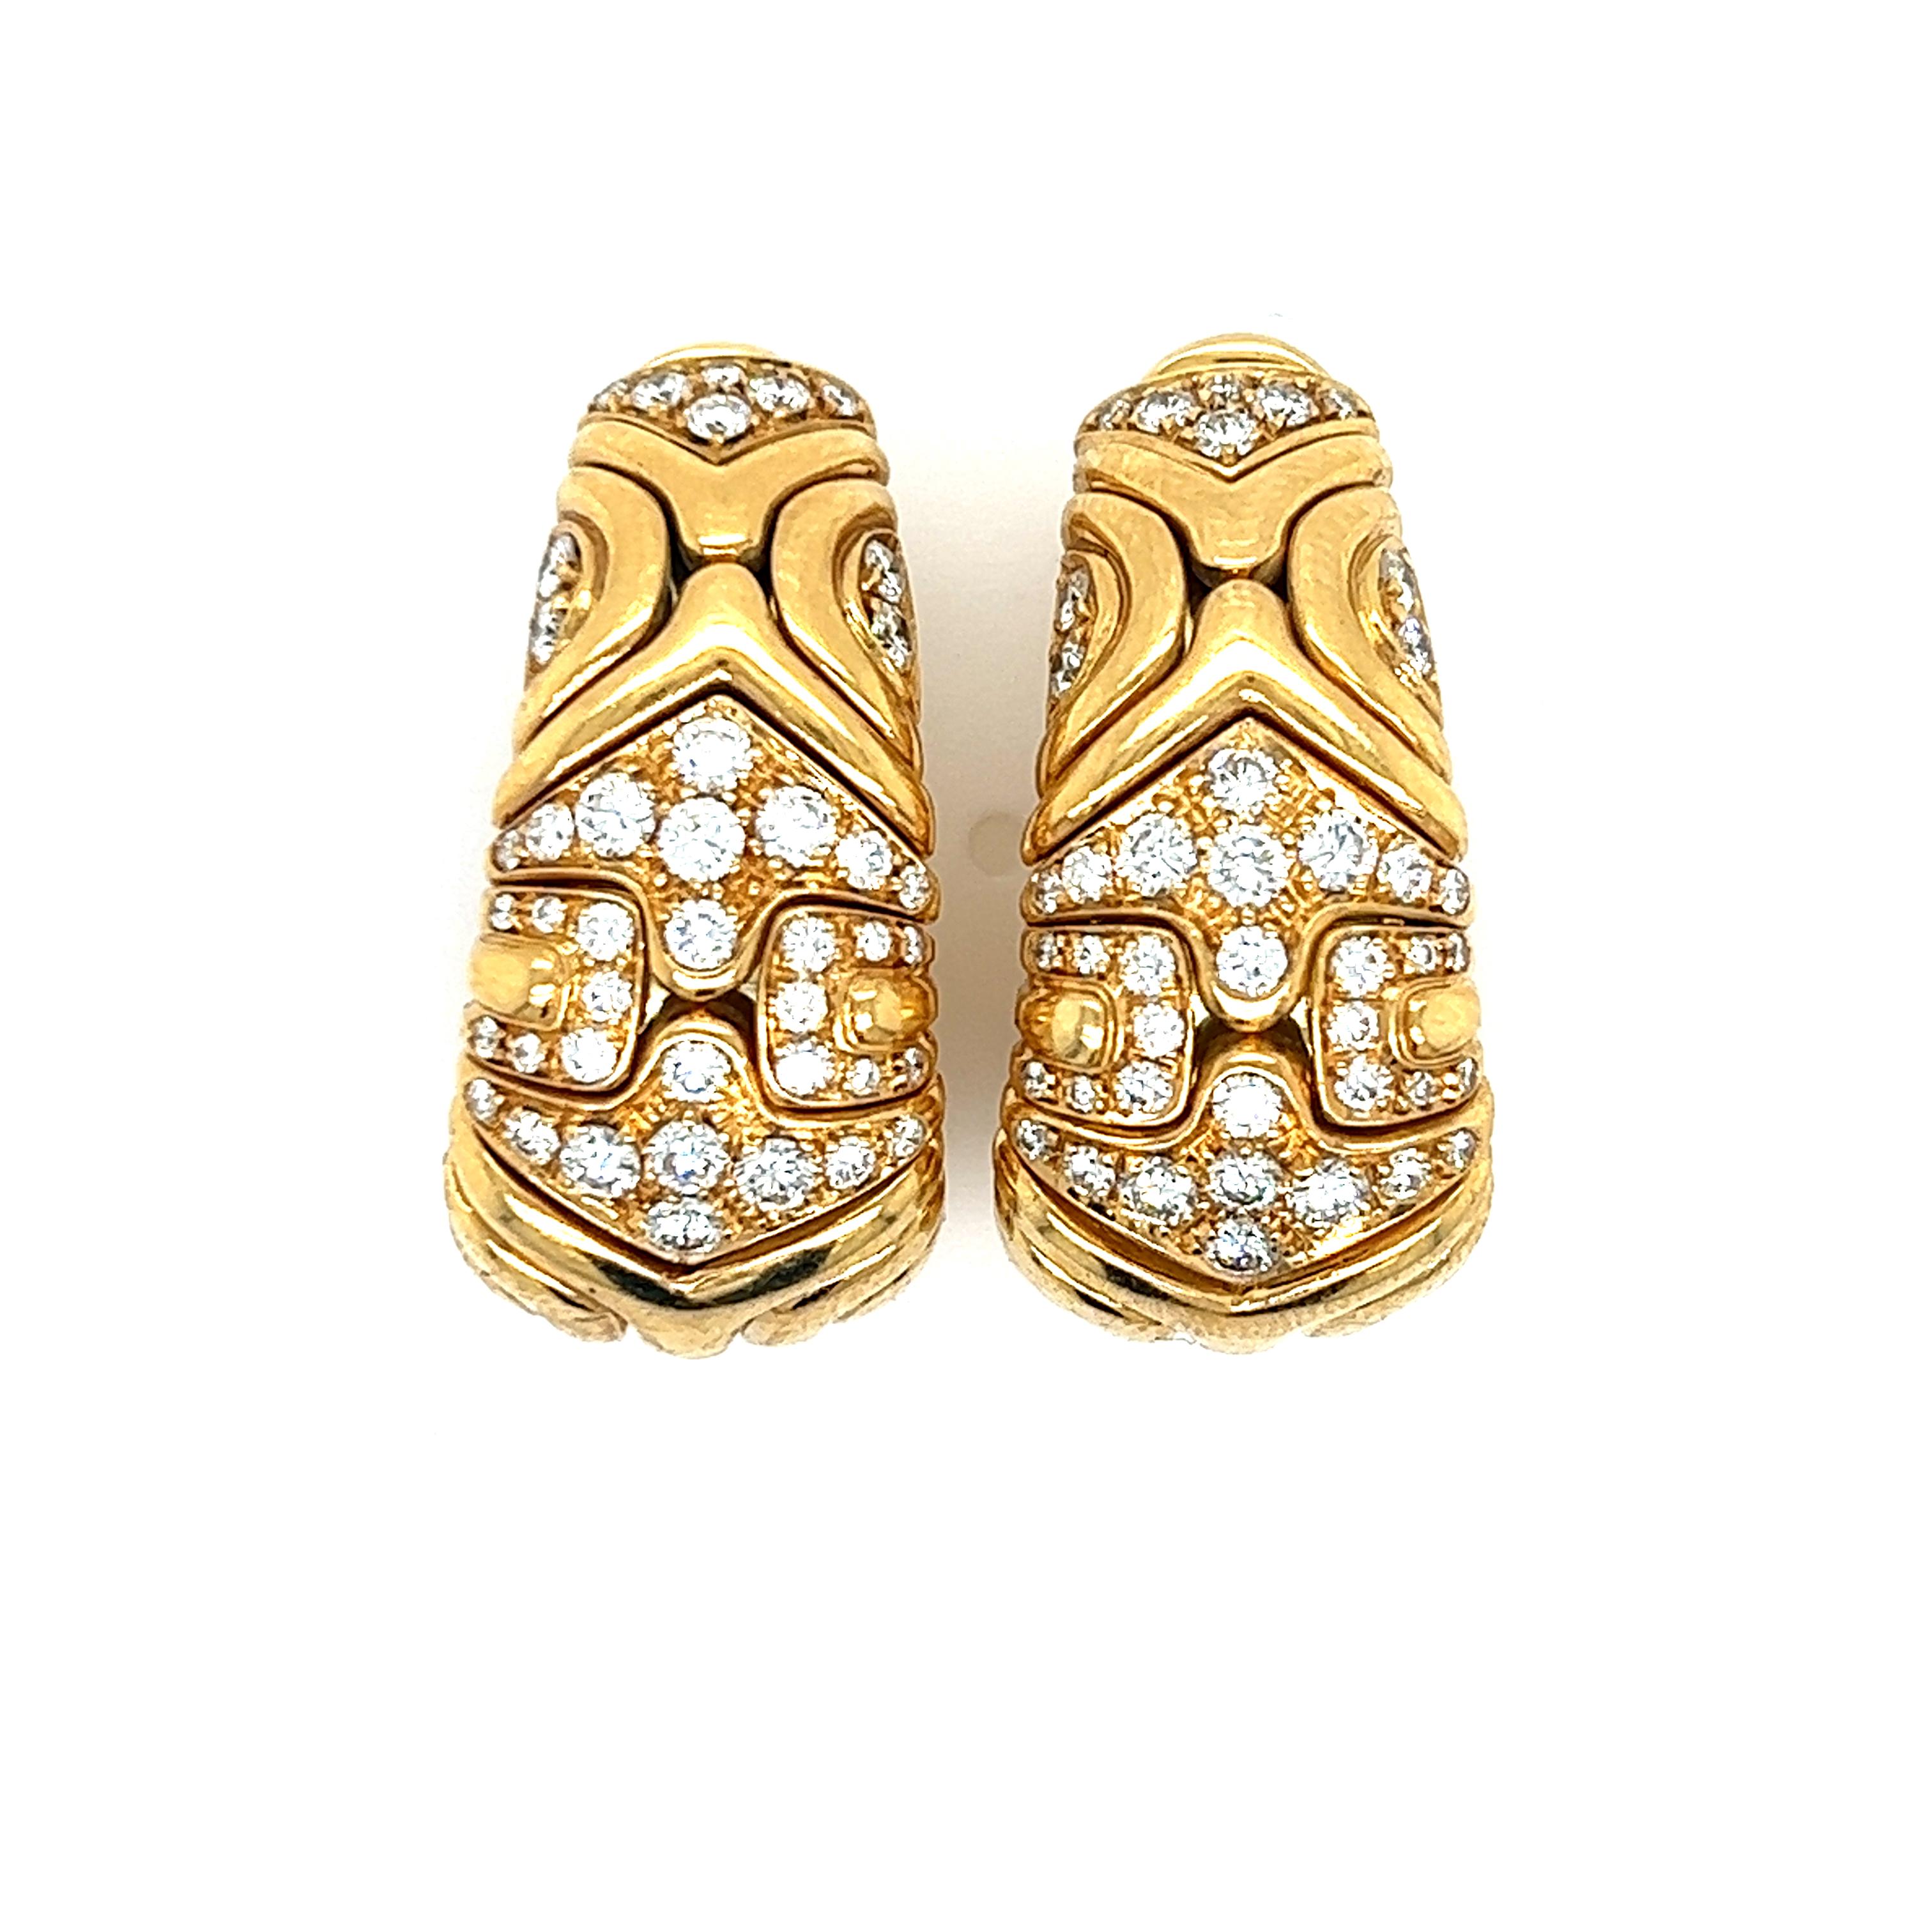    Iconic and rare vintage Bvlgari Panentesi 18k yellow gold diamond ear clips. Composed of sculpted geometric links that are set with graduated sizes of round brilliant cut earth mined diamonds. The diamonds in the design are all white in color